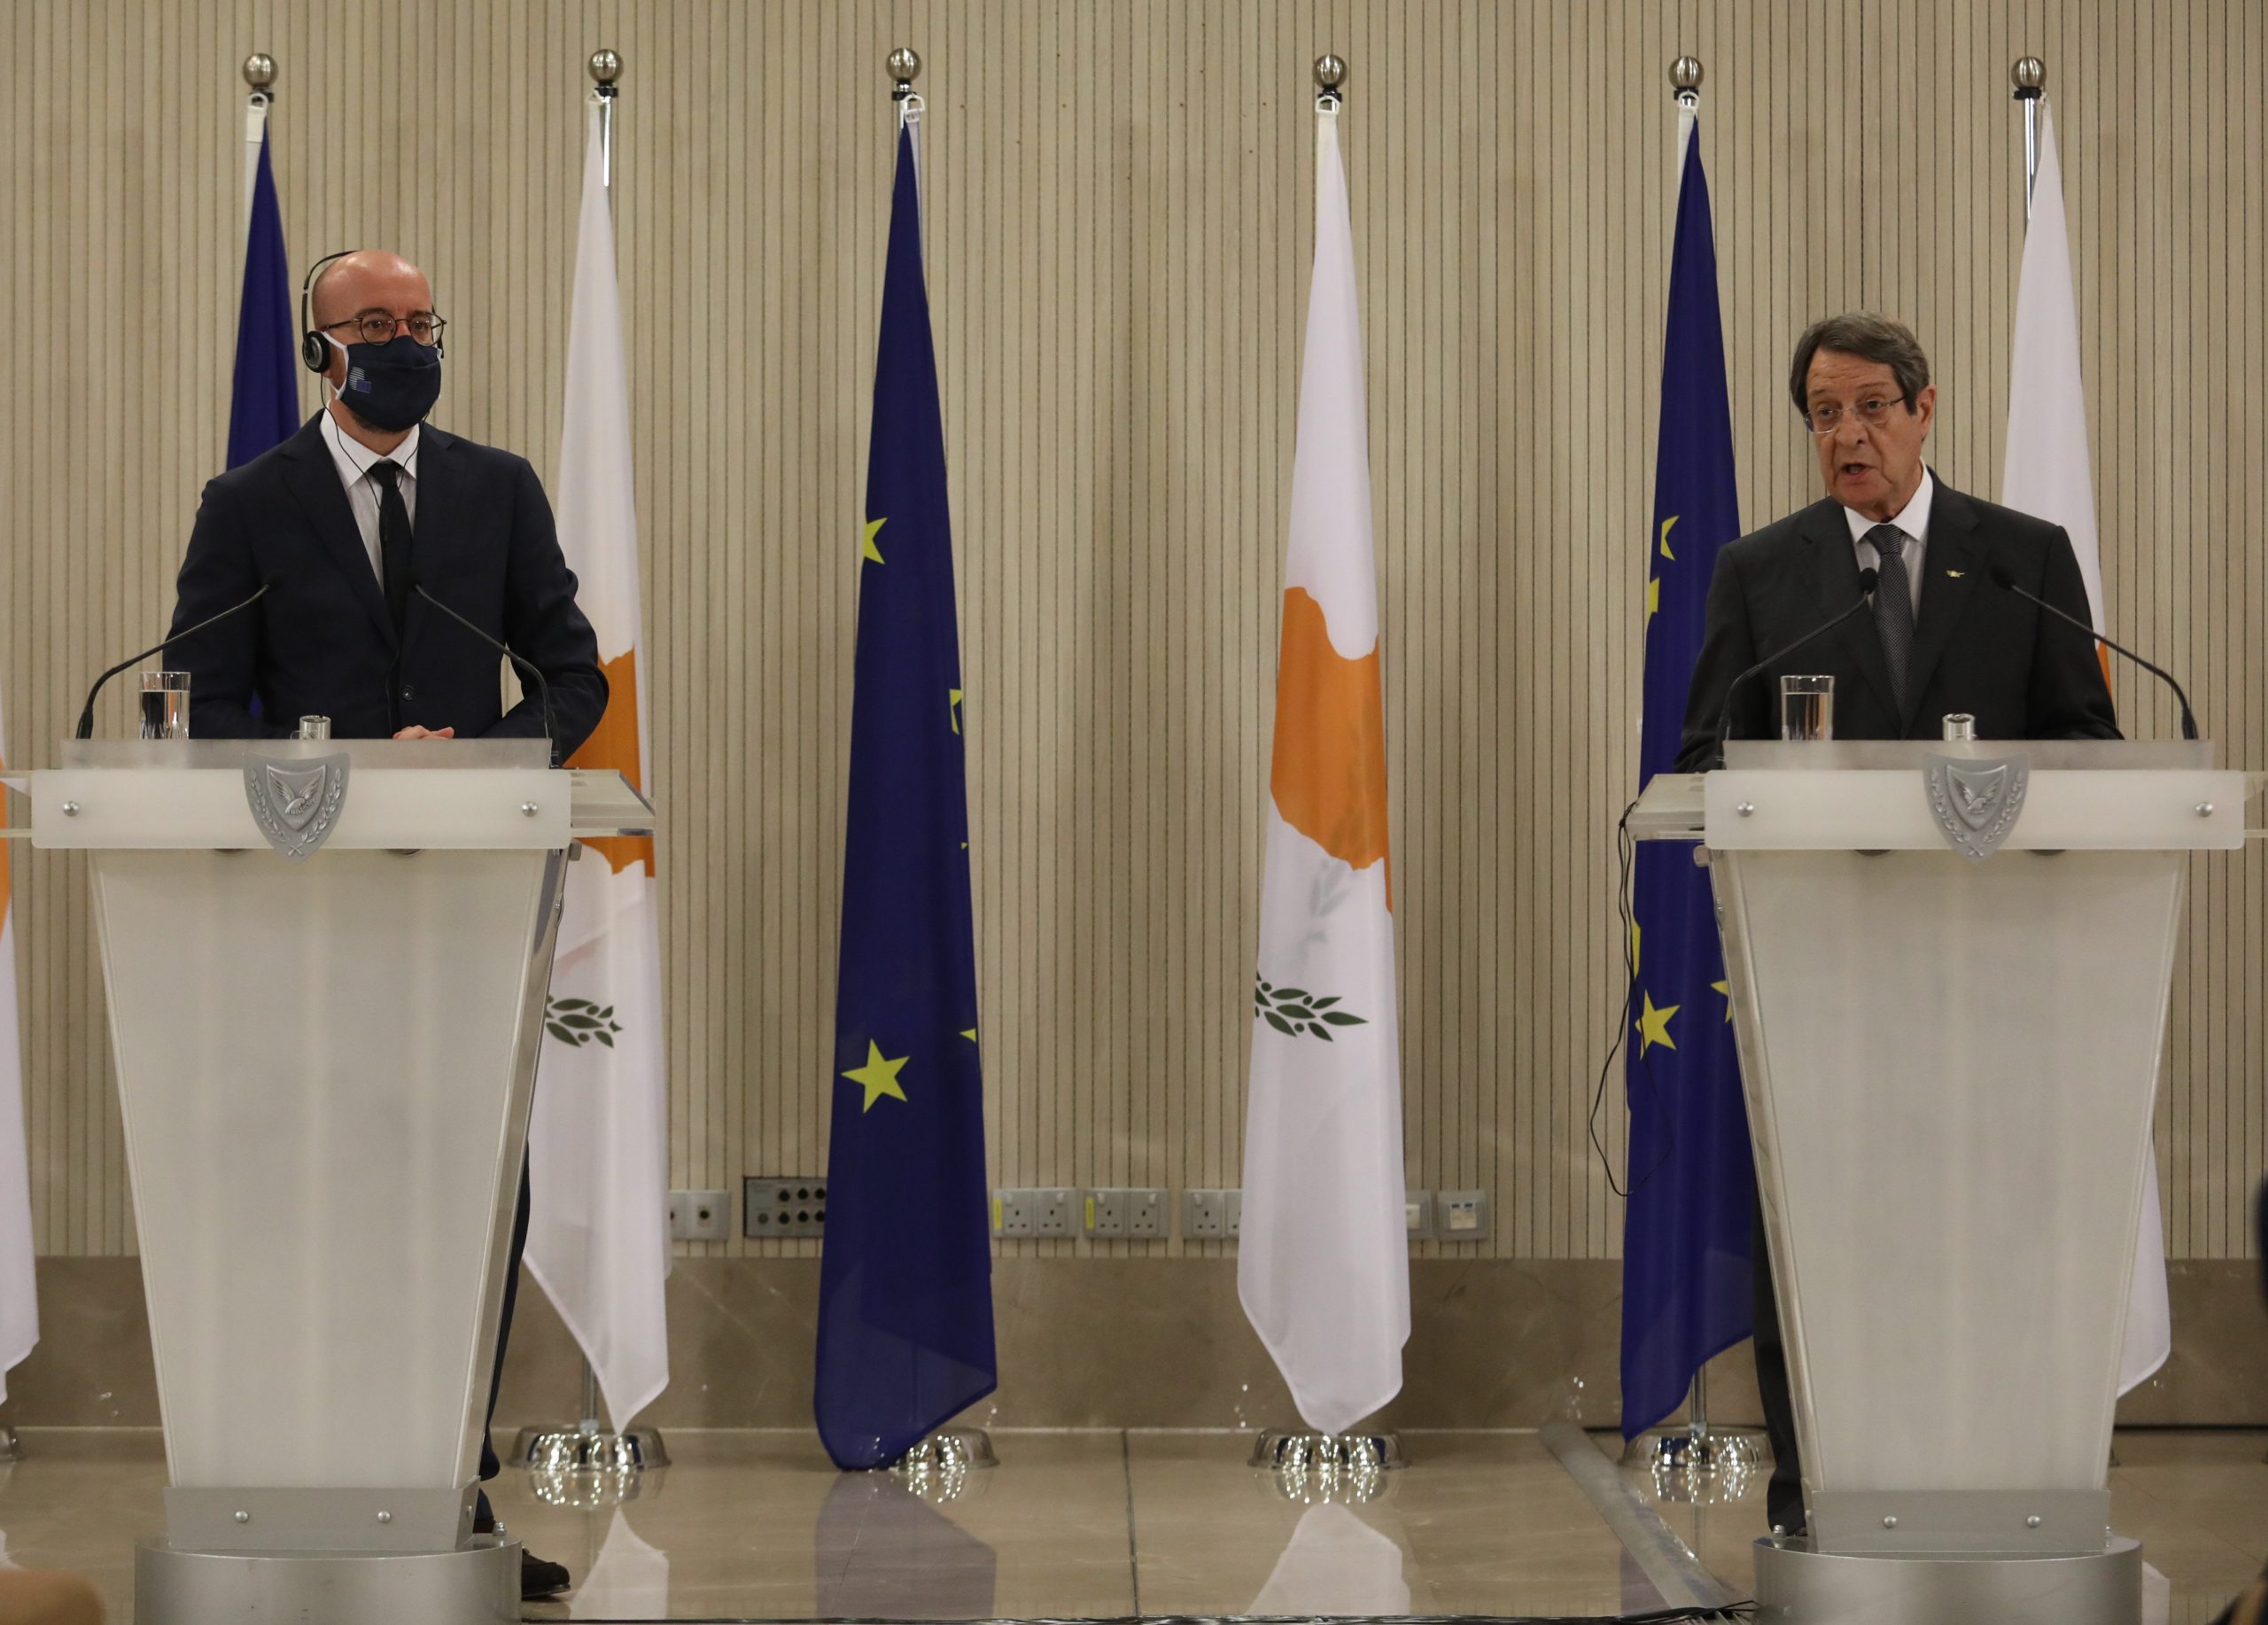 epa08672272 Cyprus President Nicos Anastasiades (R) and European Council President Charles Michel (L) speak during a news conference at the Presidential Palace in Nicosia, Cyprus, 16 September 2020. Michel is in Cyprus on a one-day official visit.  EPA/YIANNIS KOURTOGLOU / POOL